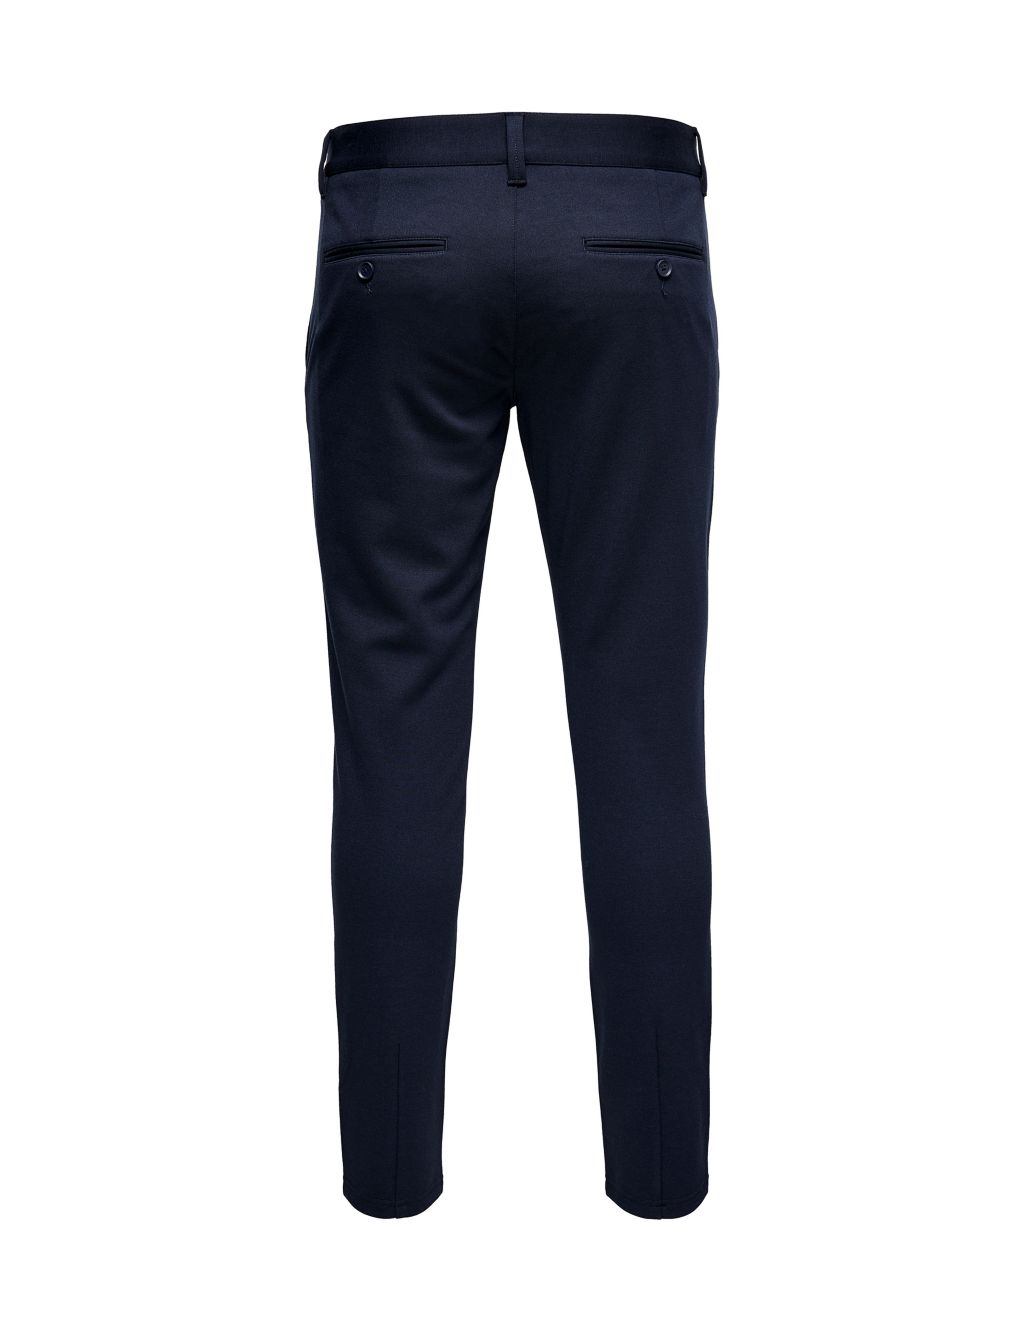 Tapered Fit Flat Front Trousers image 7